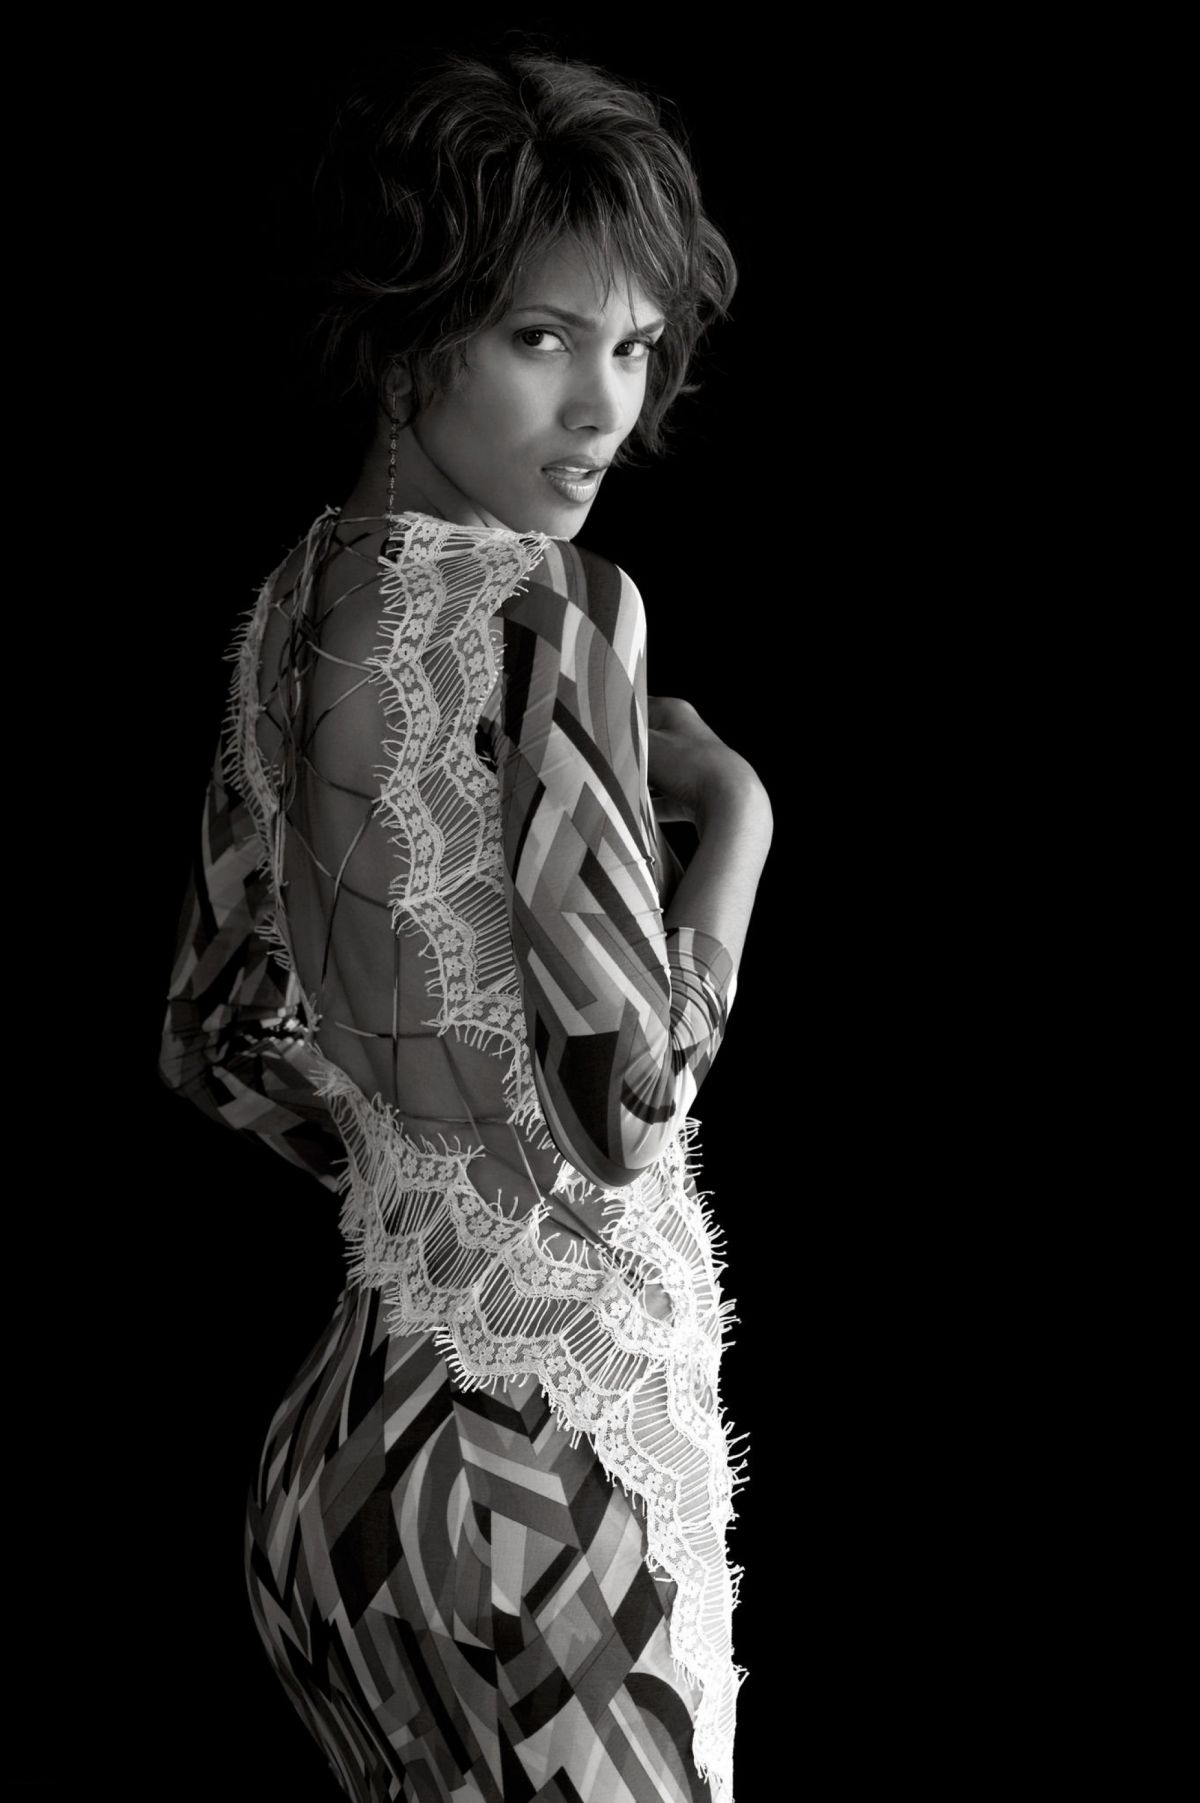 Halle Berry at Photoshoot 2003